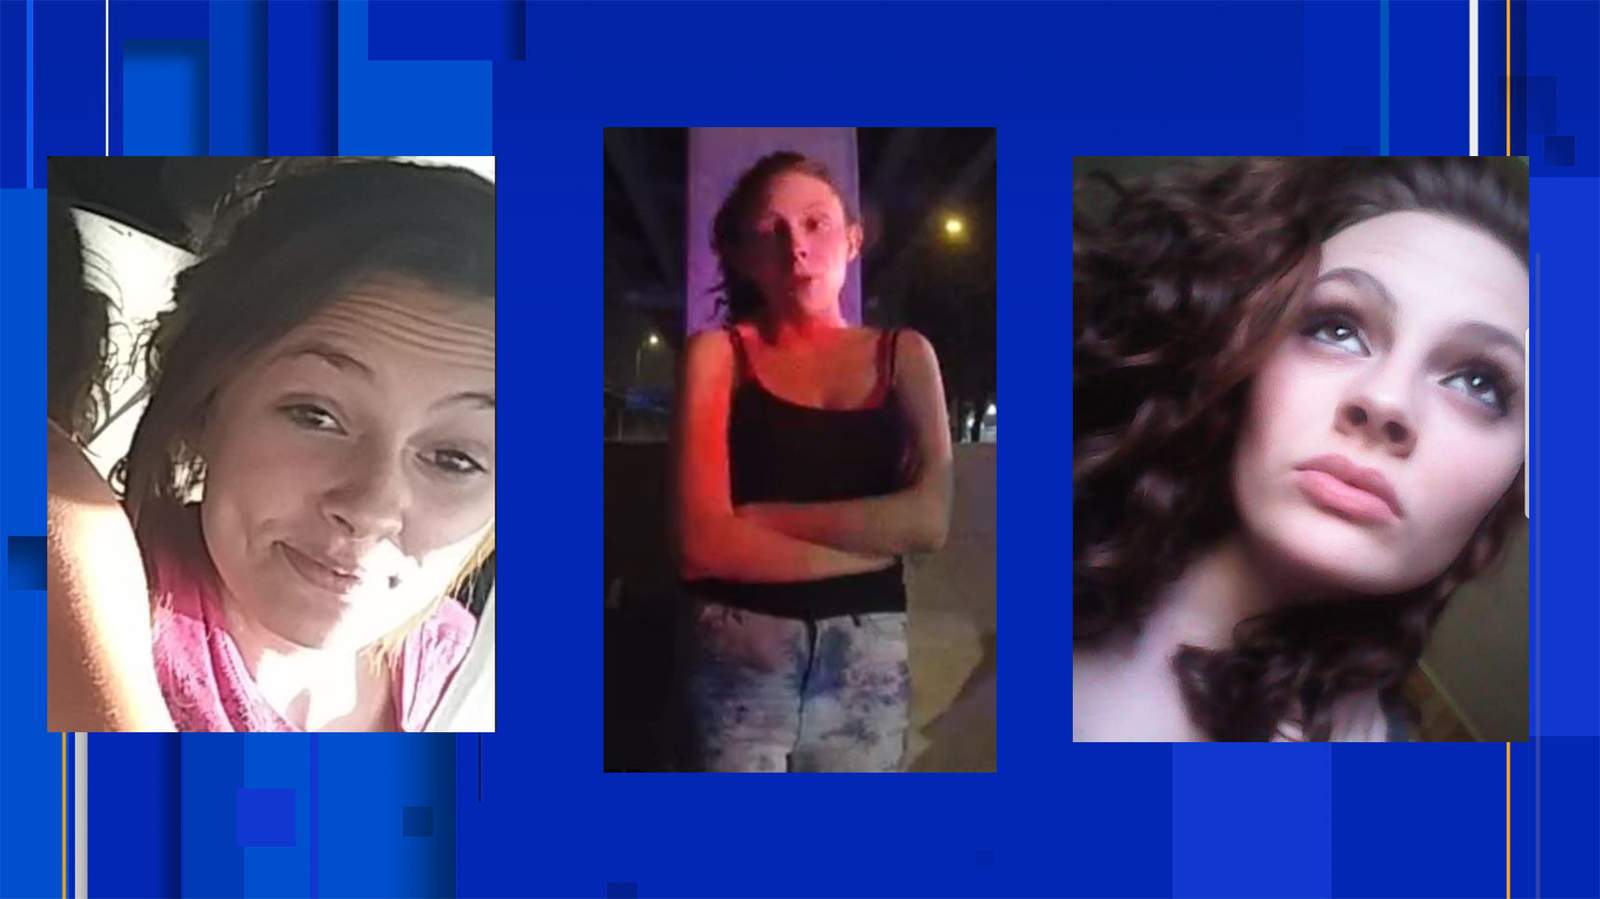 Woman missing since April may have been in San Antonio, Austin police say